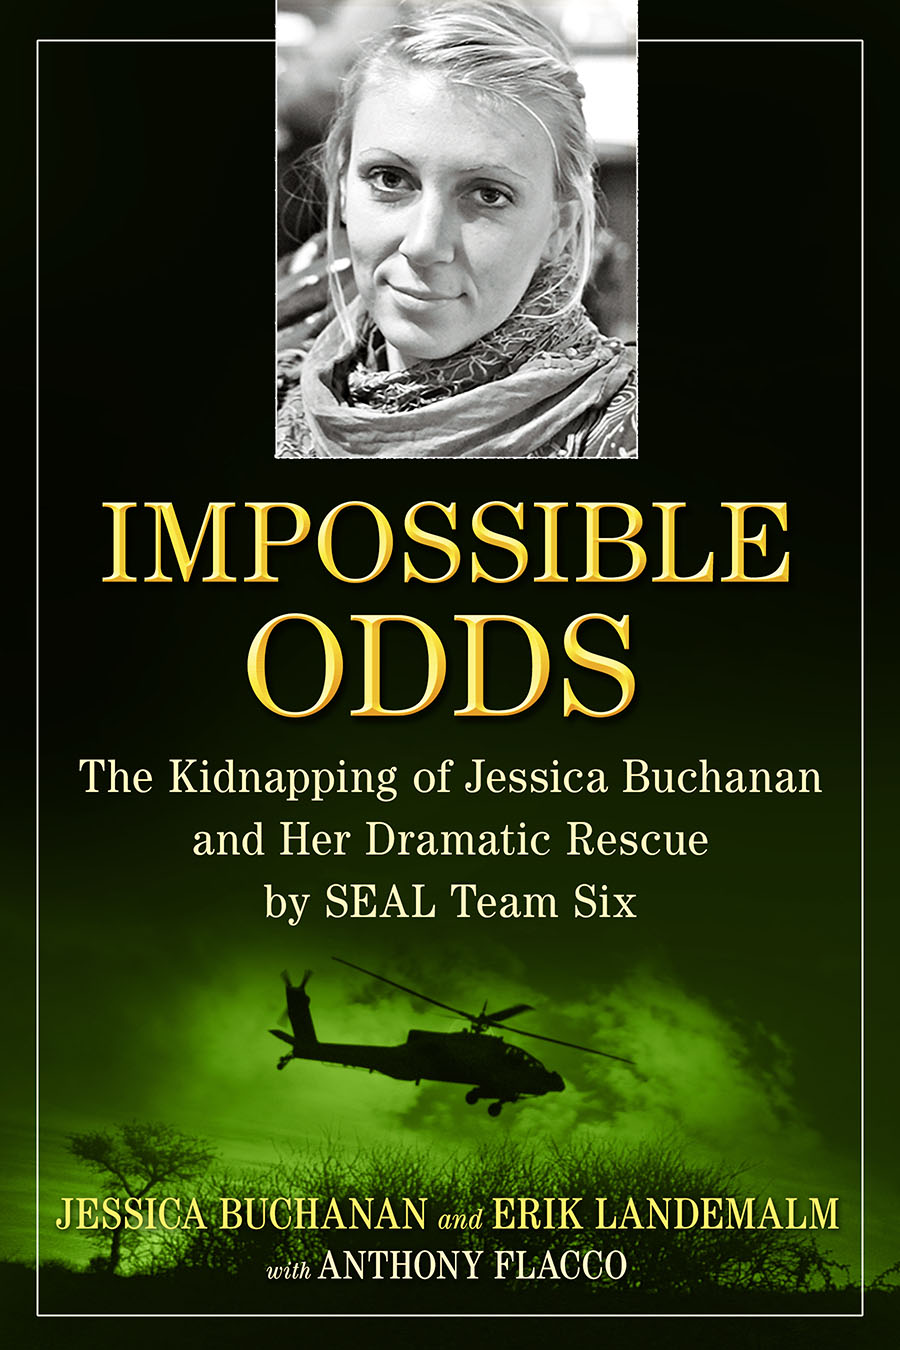 Impossible Odds Executive Producer Sony Pictures Television